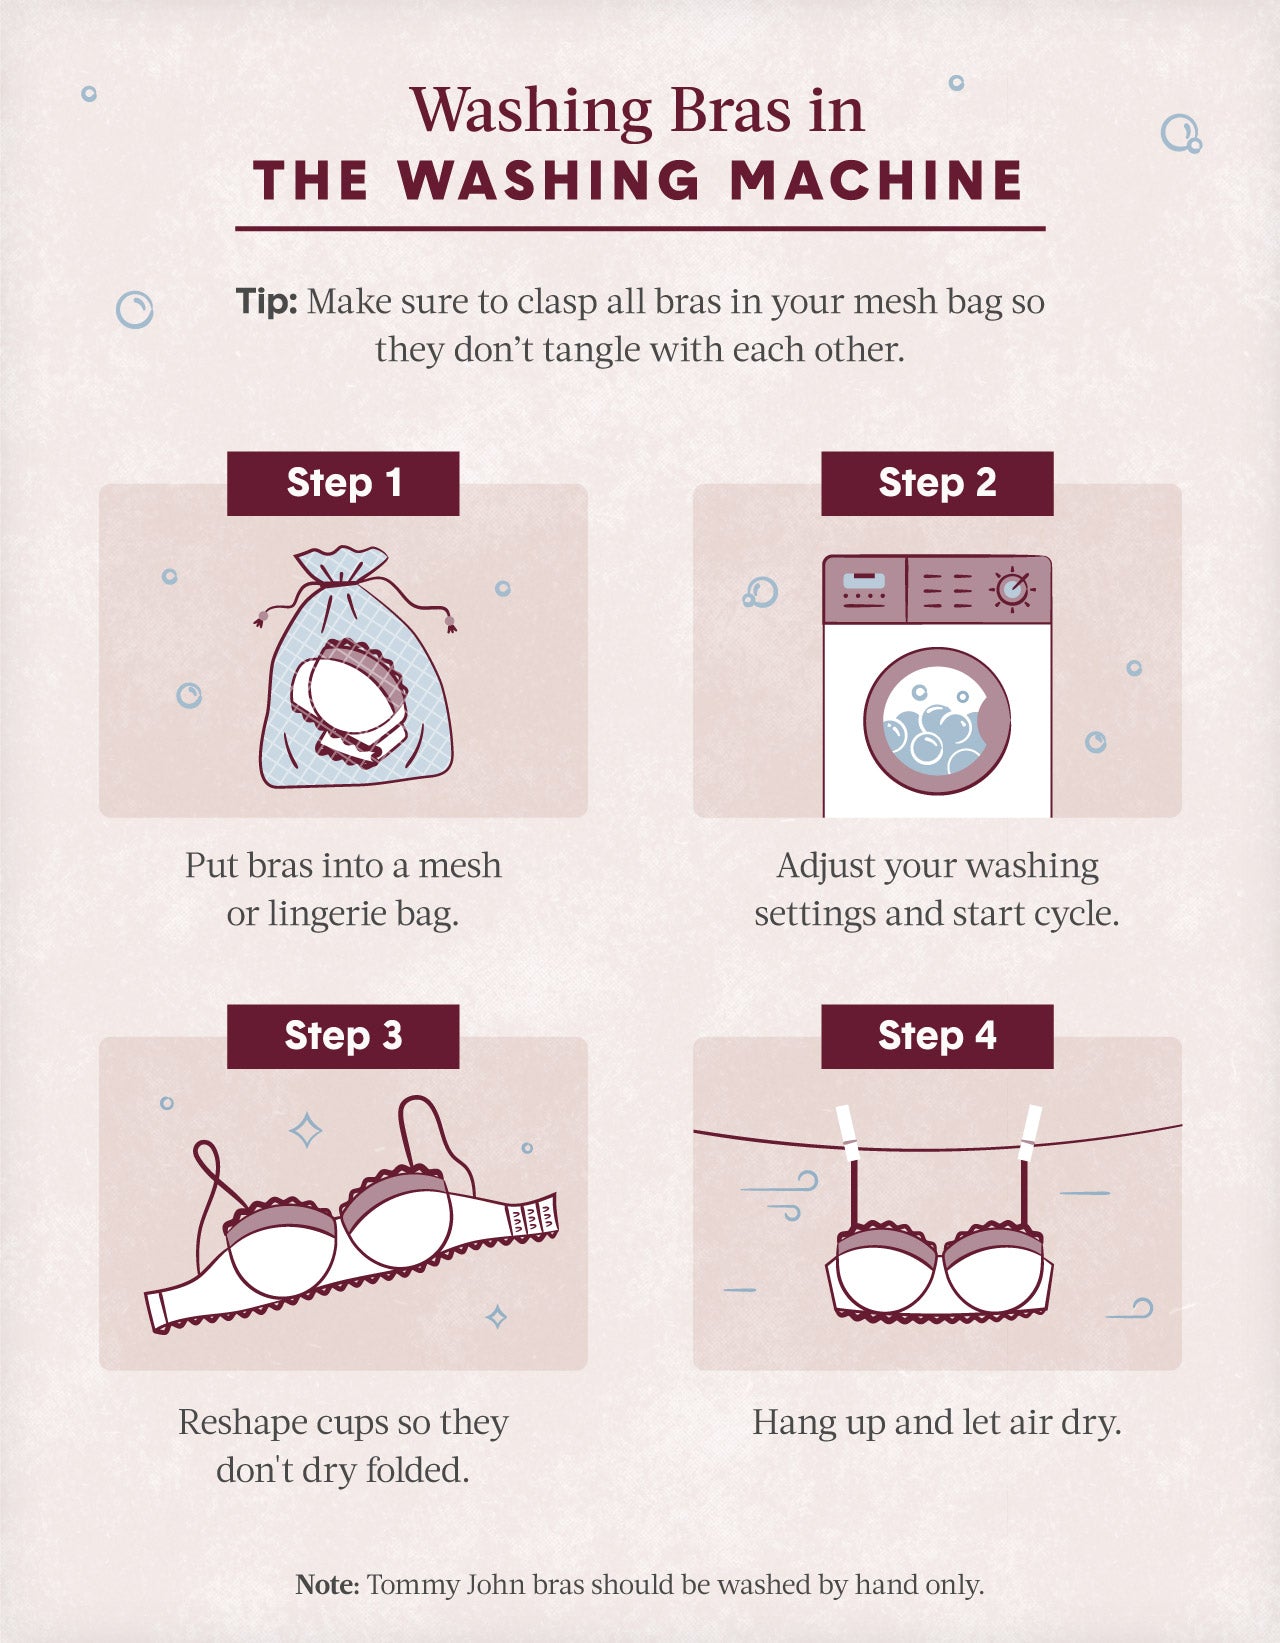 How to Wash Bras. A few tips from your washer dryer rental friends